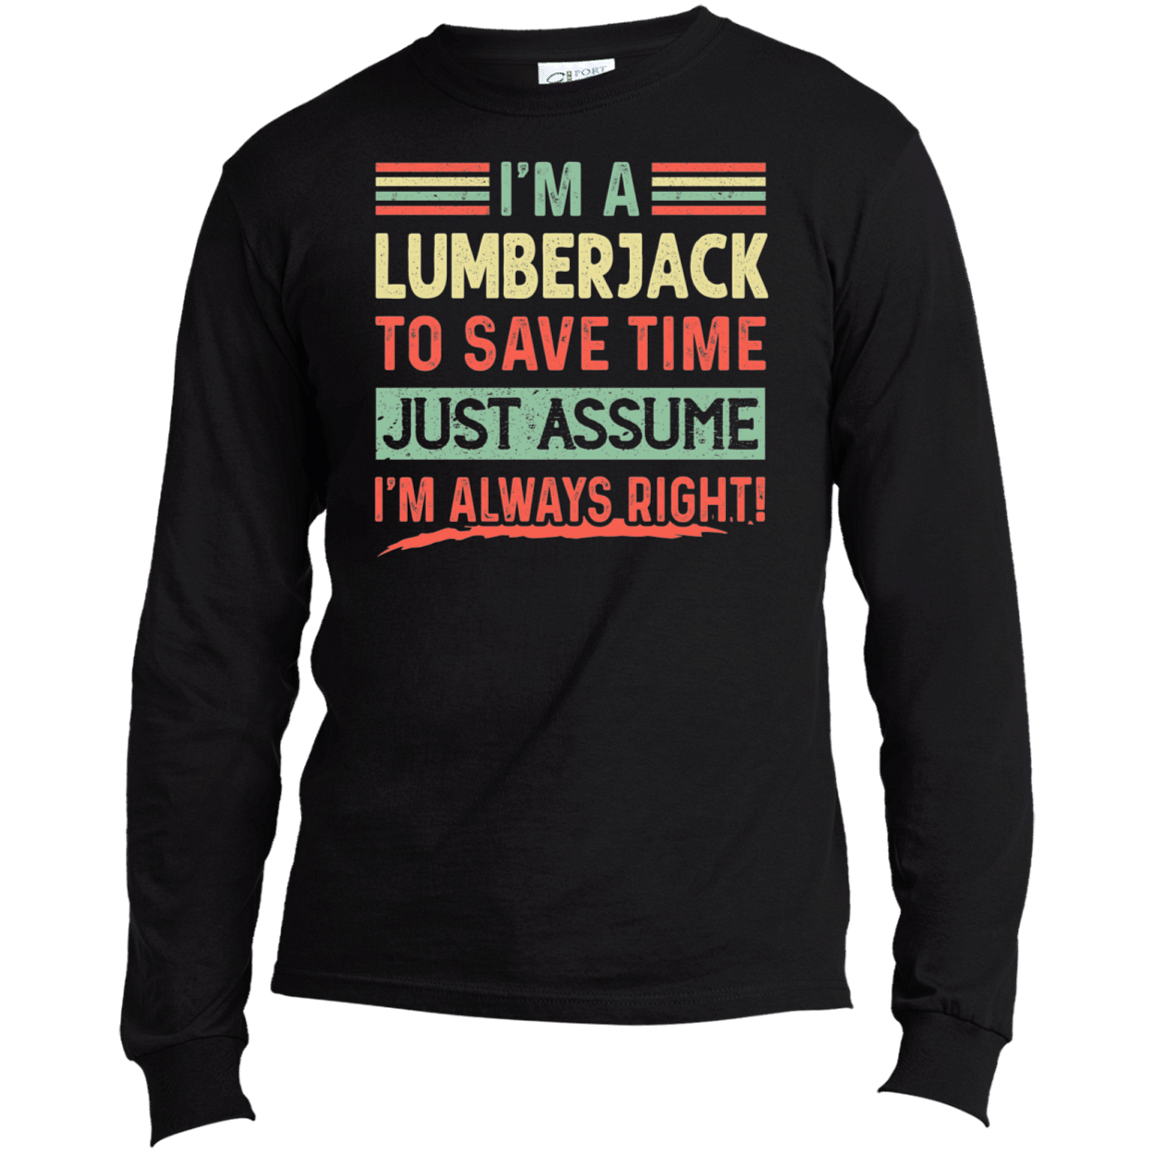 USA100LS Long Sleeve Made in the US T-Shirt